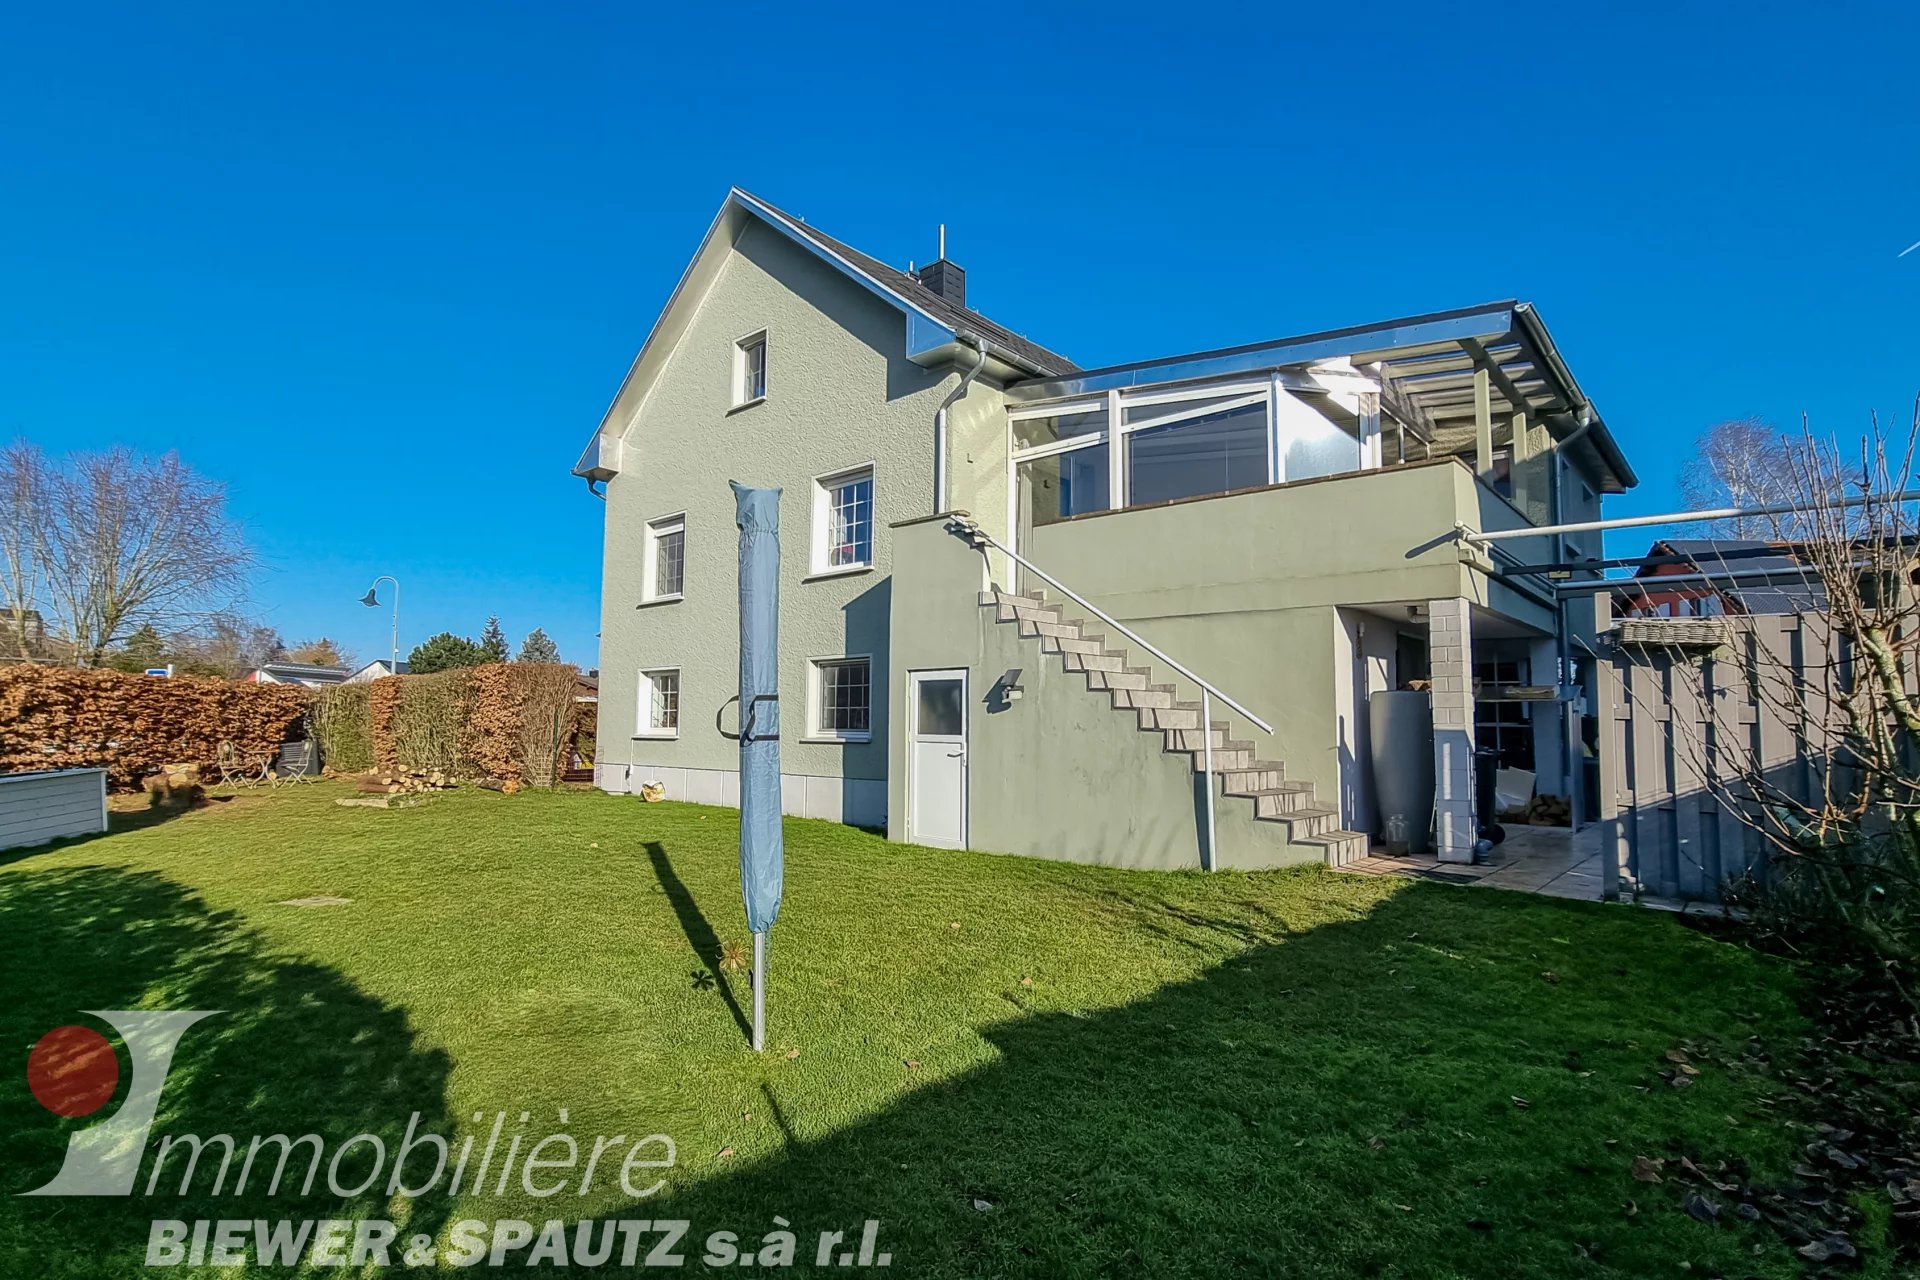 FOR SALE - 3 bedroom detached house in Consdorf